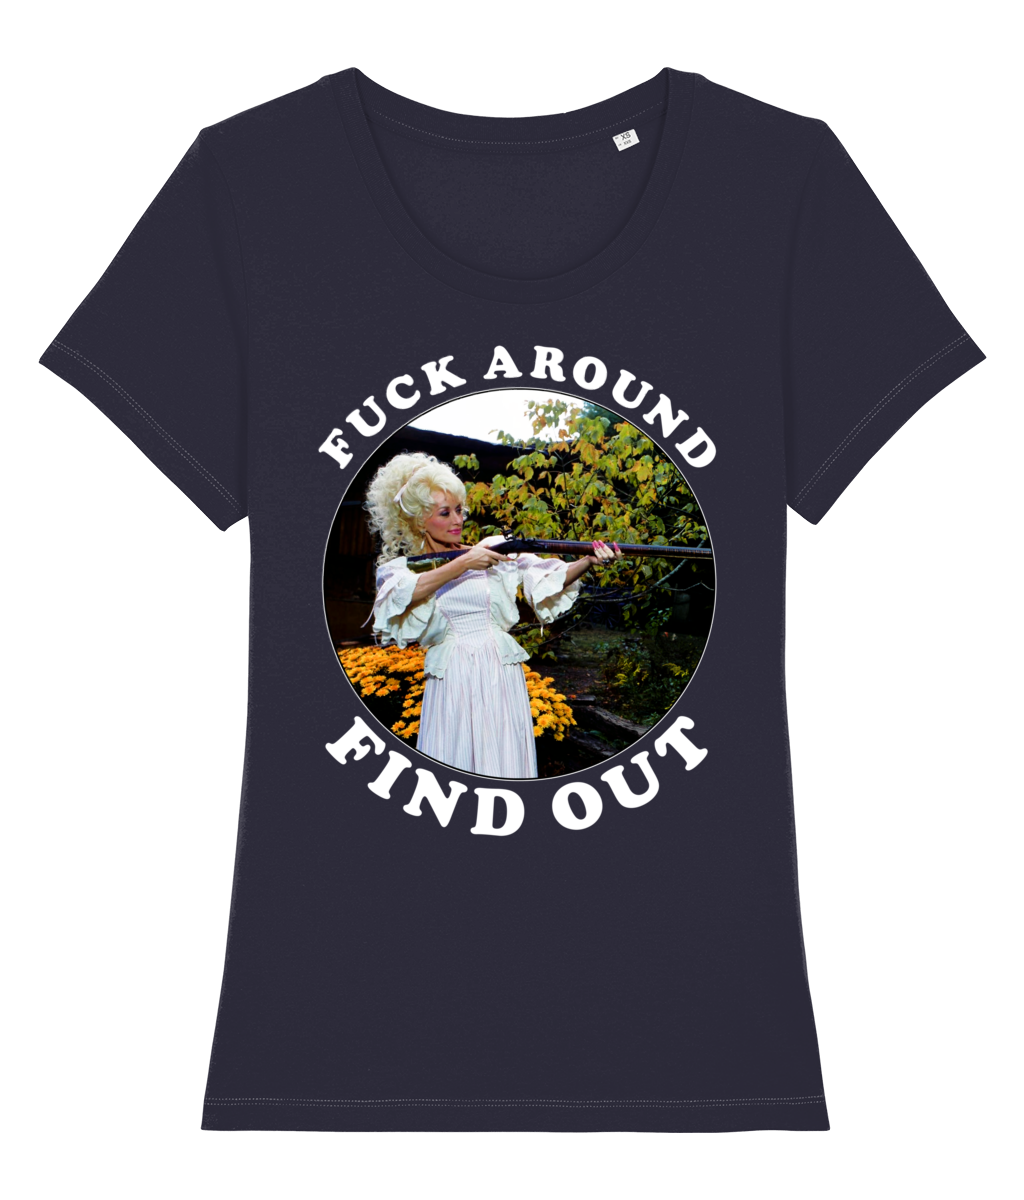 Fuck Around Find Out - White Text - Women's T Shirt